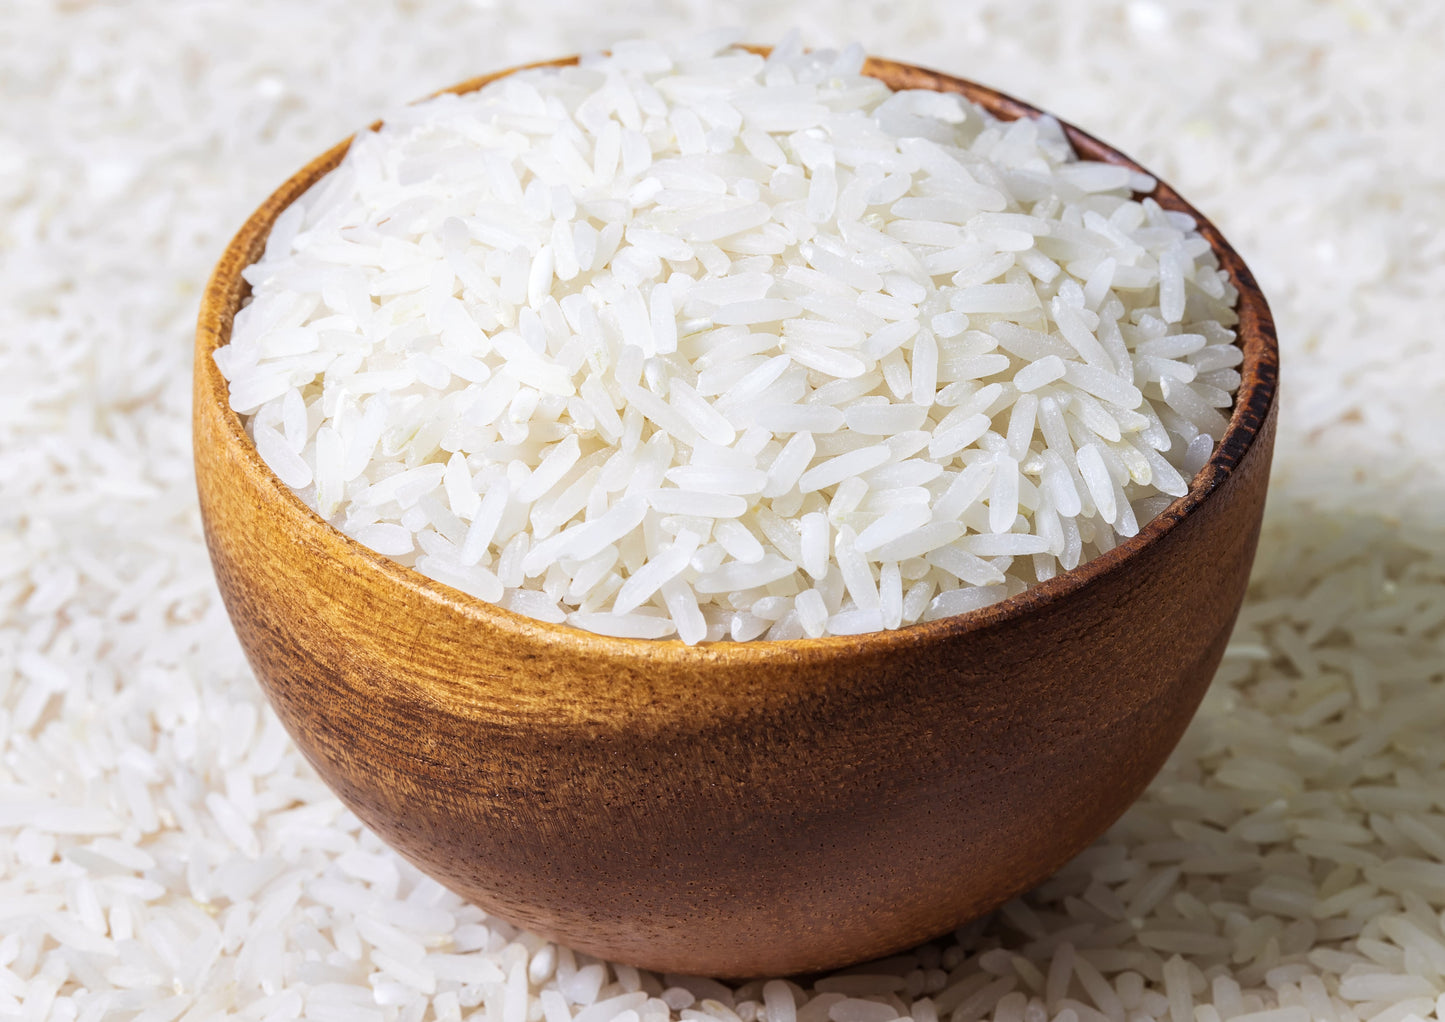 Thai Hom Mali Jasmine White Rice — Naturally Fragrant Long-Grain Rice, Flavorful, Raw, Vegan, Bulk. Slightly Sticky Texture. Great for Asian, Indian, and Middle Eastern Cuisines